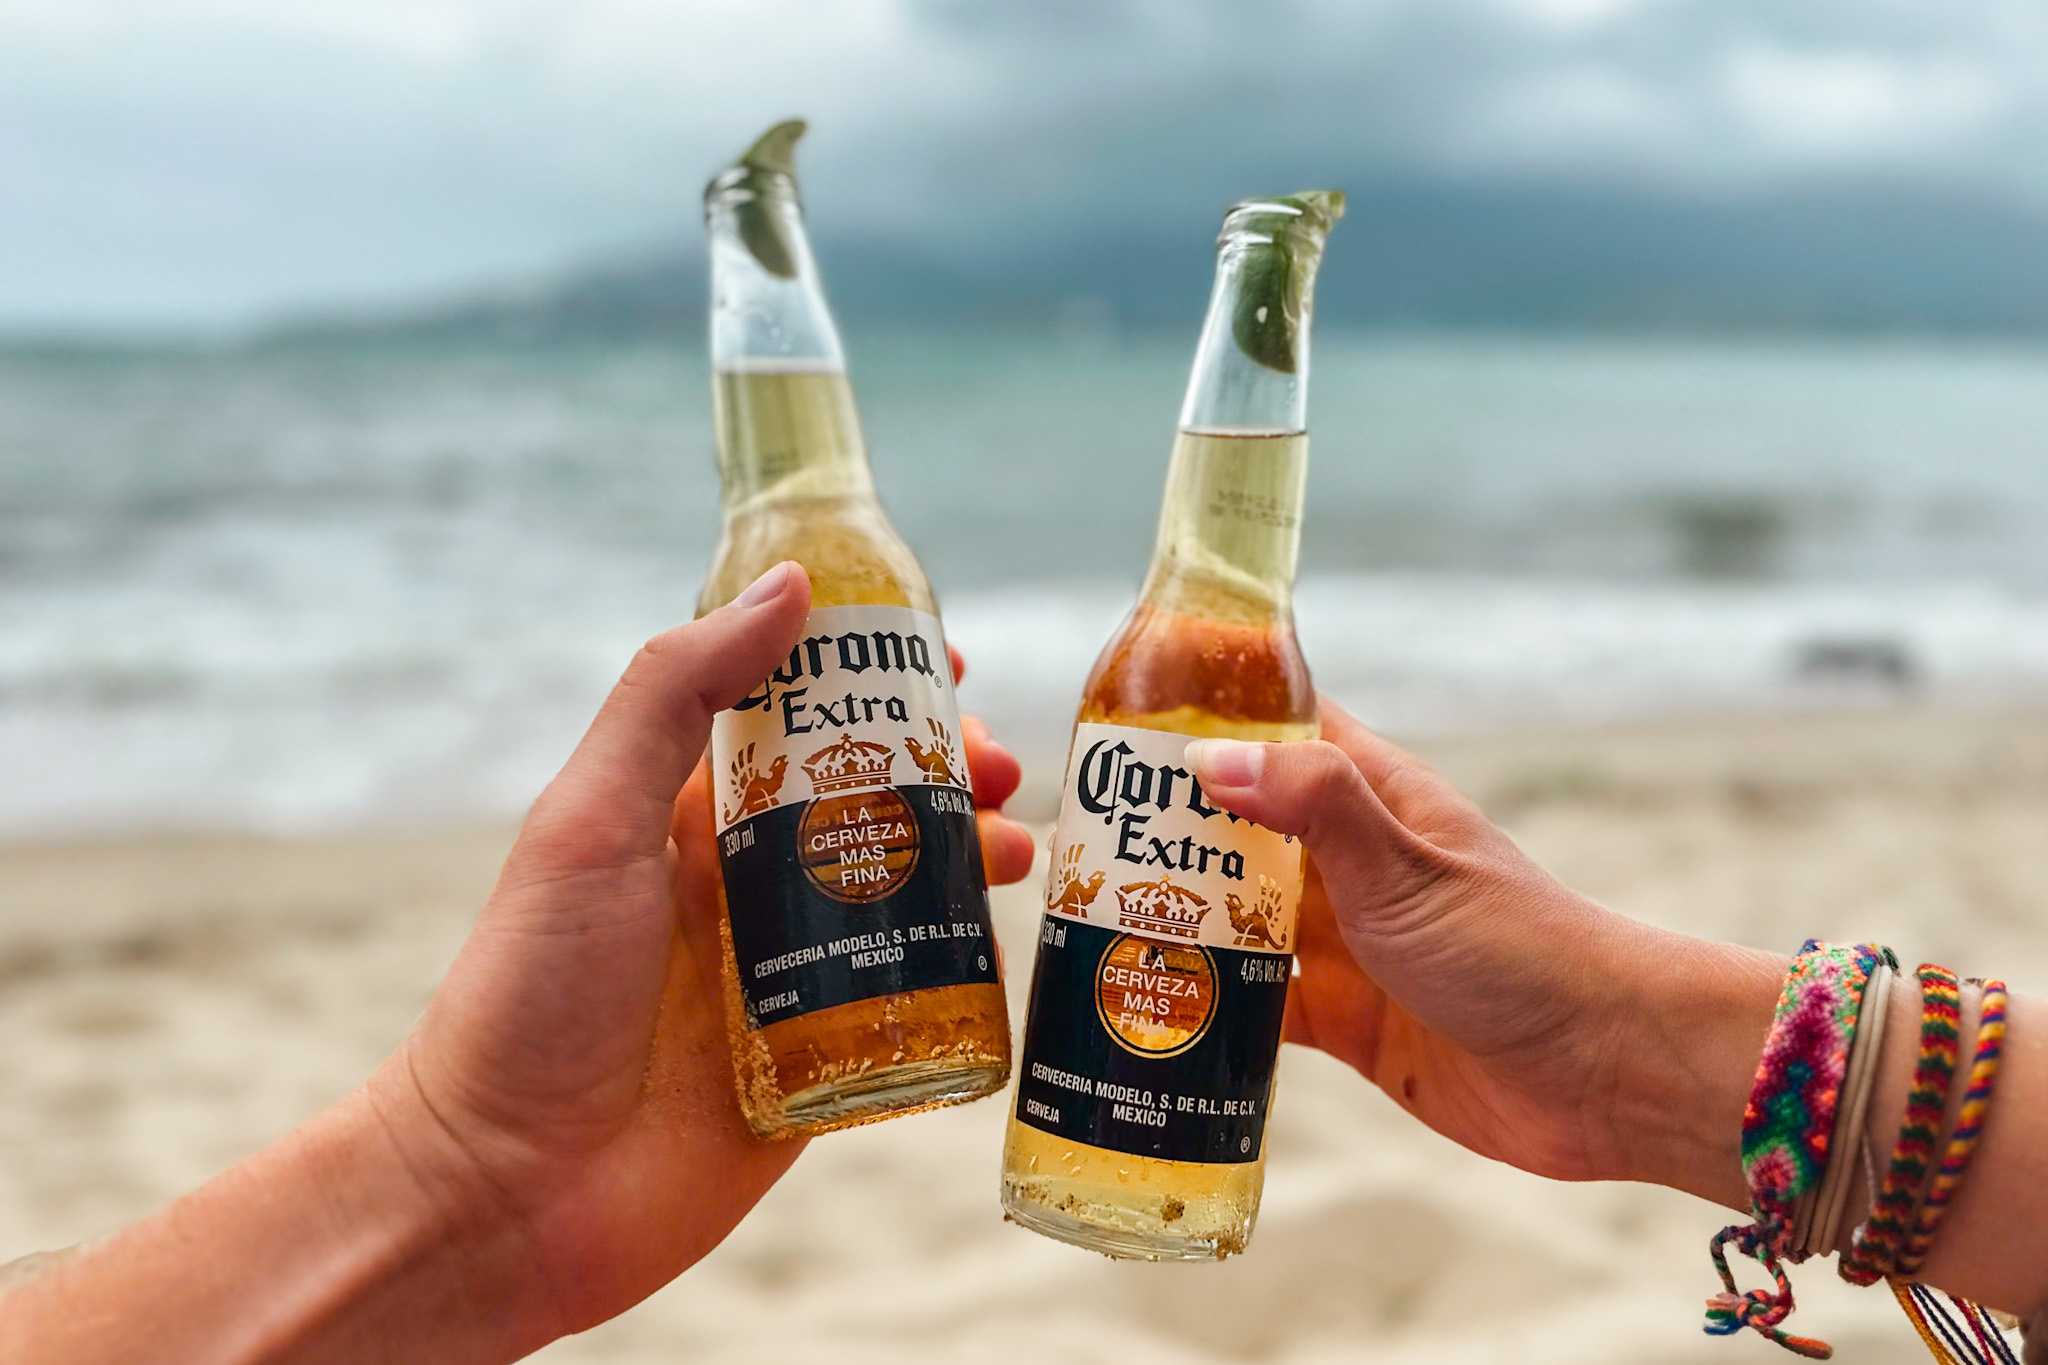 Ilhabela Travel Guide: Drinking cold beer on the beach